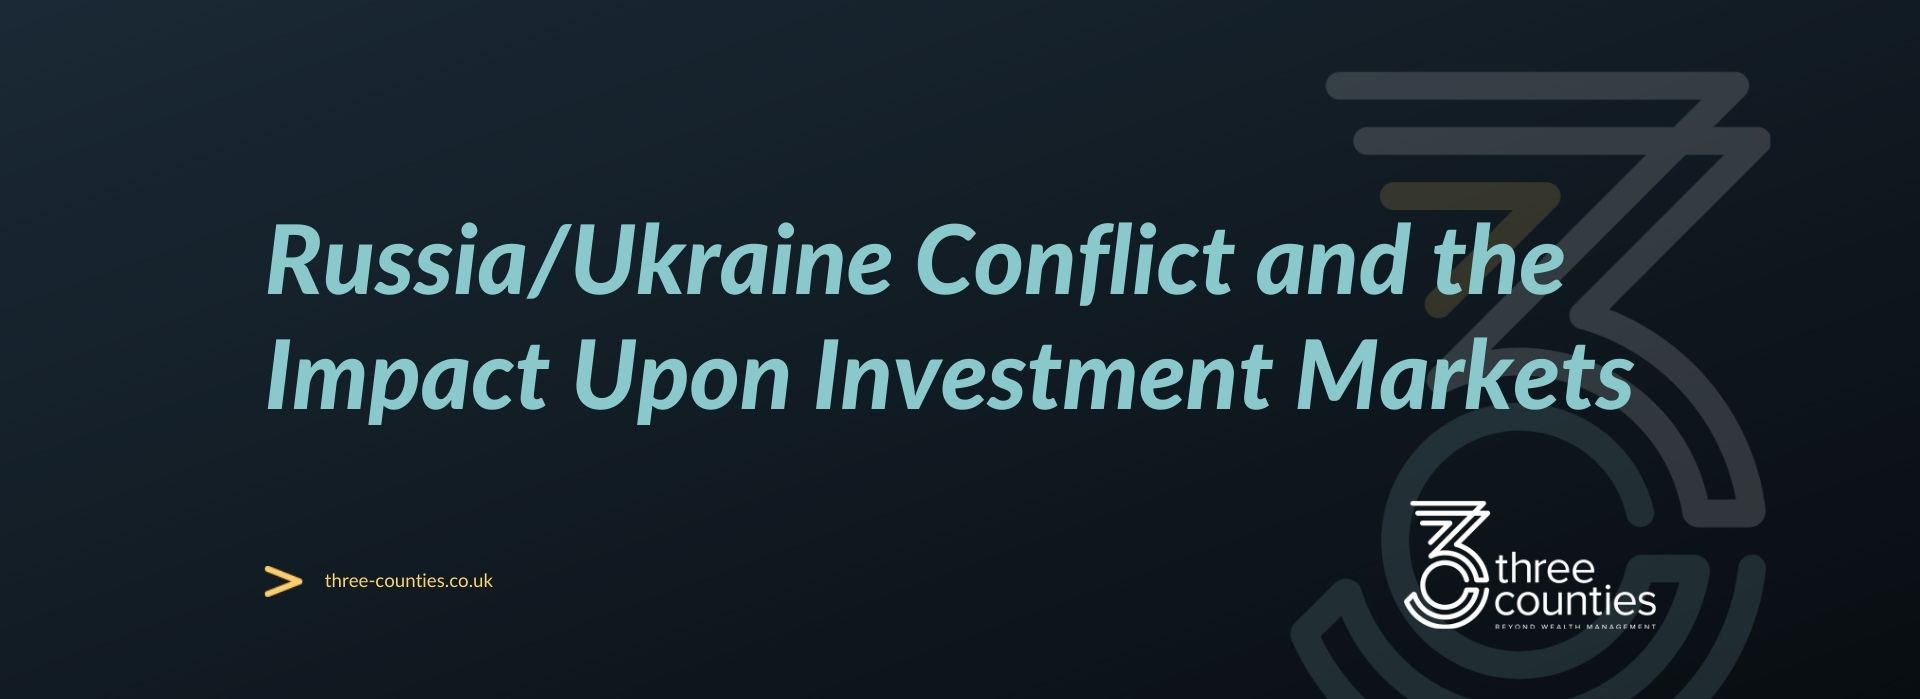 Russia/Ukraine Conflict and the Impact Upon Investment Markets